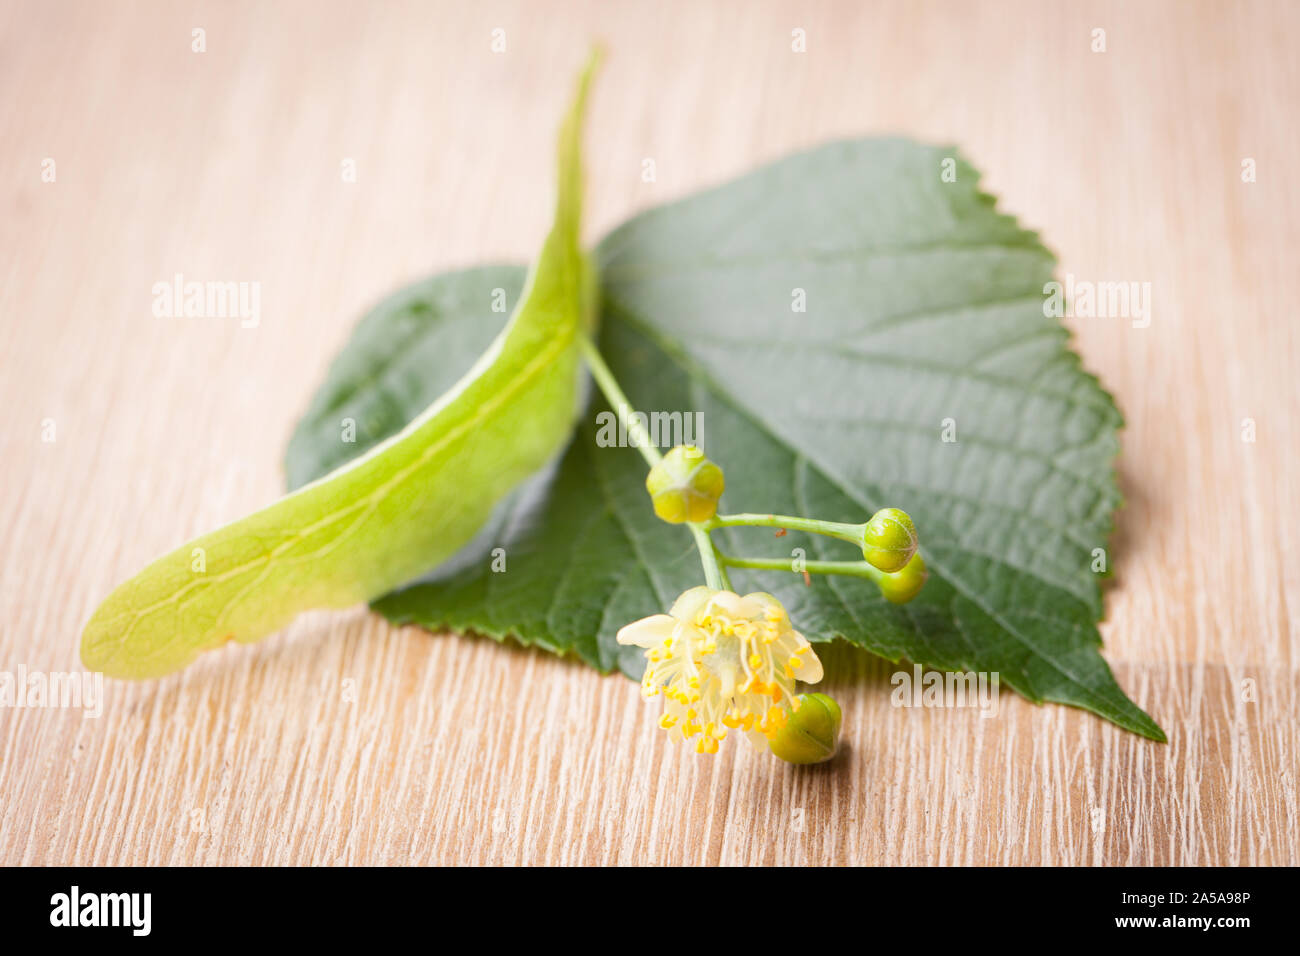 Lime blossom and leaf on wood Stock Photo